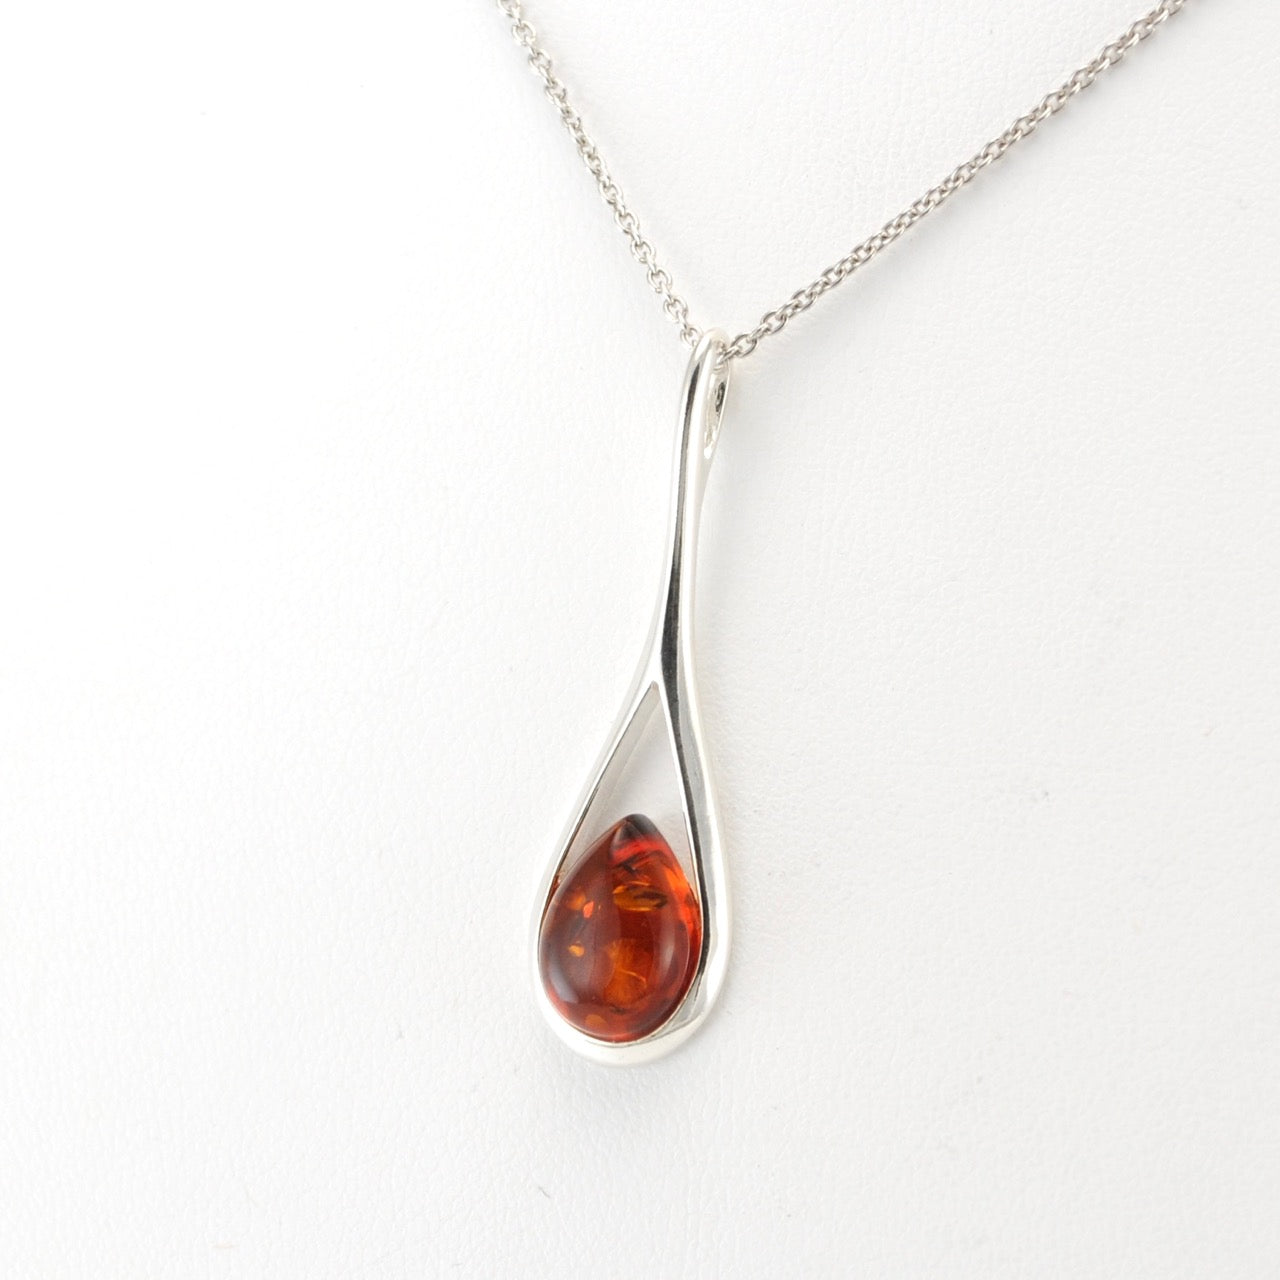 Silver Baltic Amber Elongated Tear Necklace